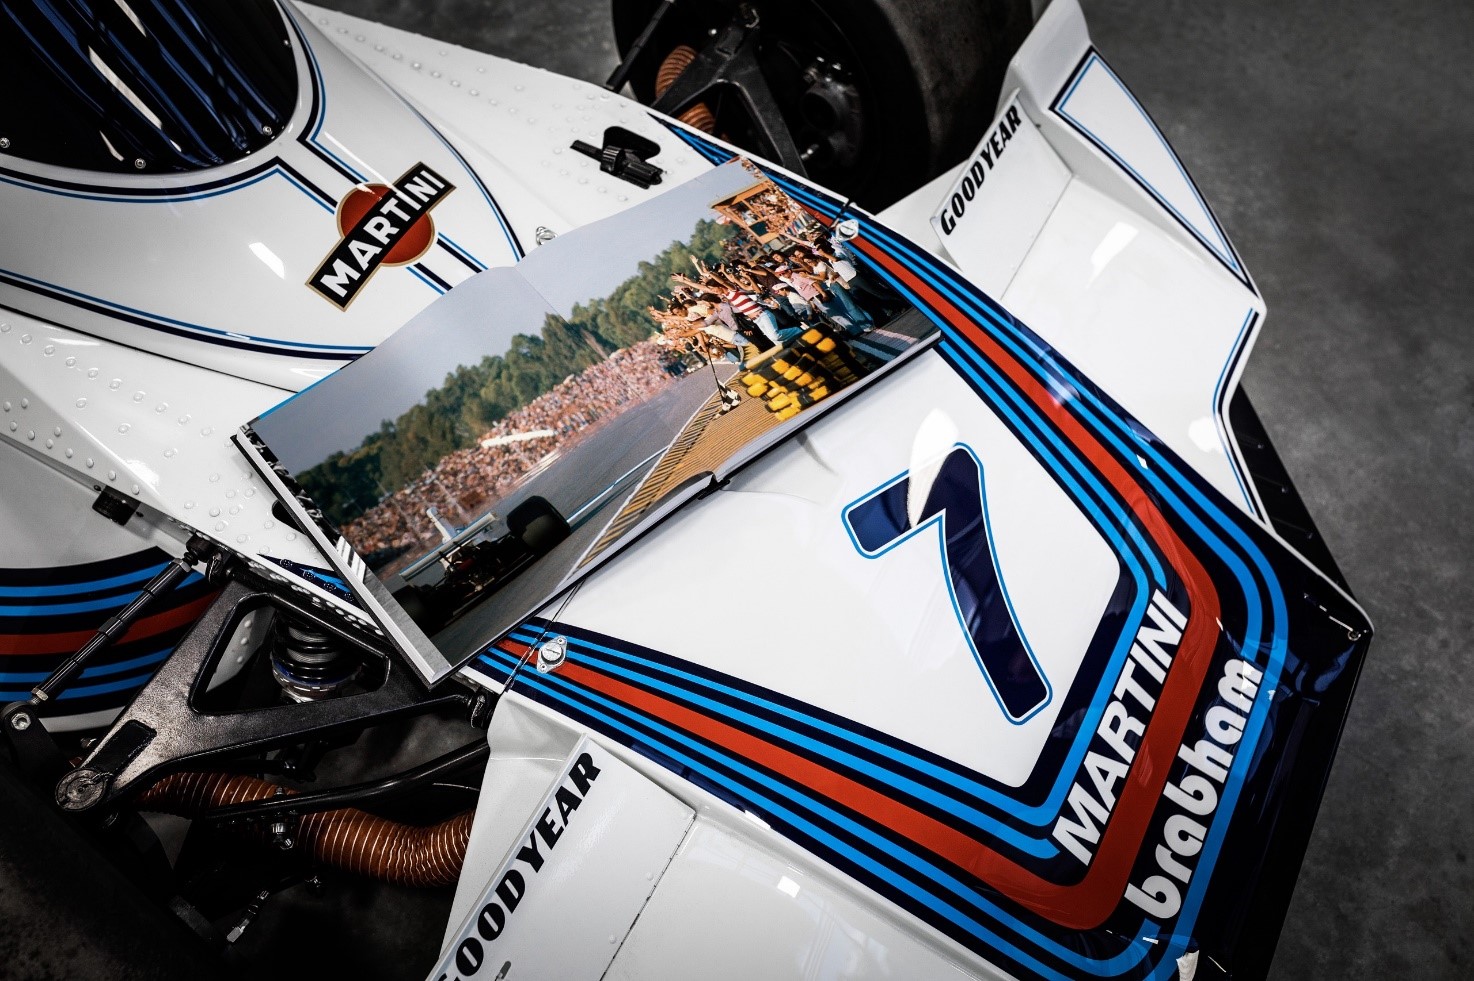 The newcomer Gordon Murray would achieve great height with the Brabham motor team at the beginning of his career in Formula One. One Formula - Brabham BT44b.